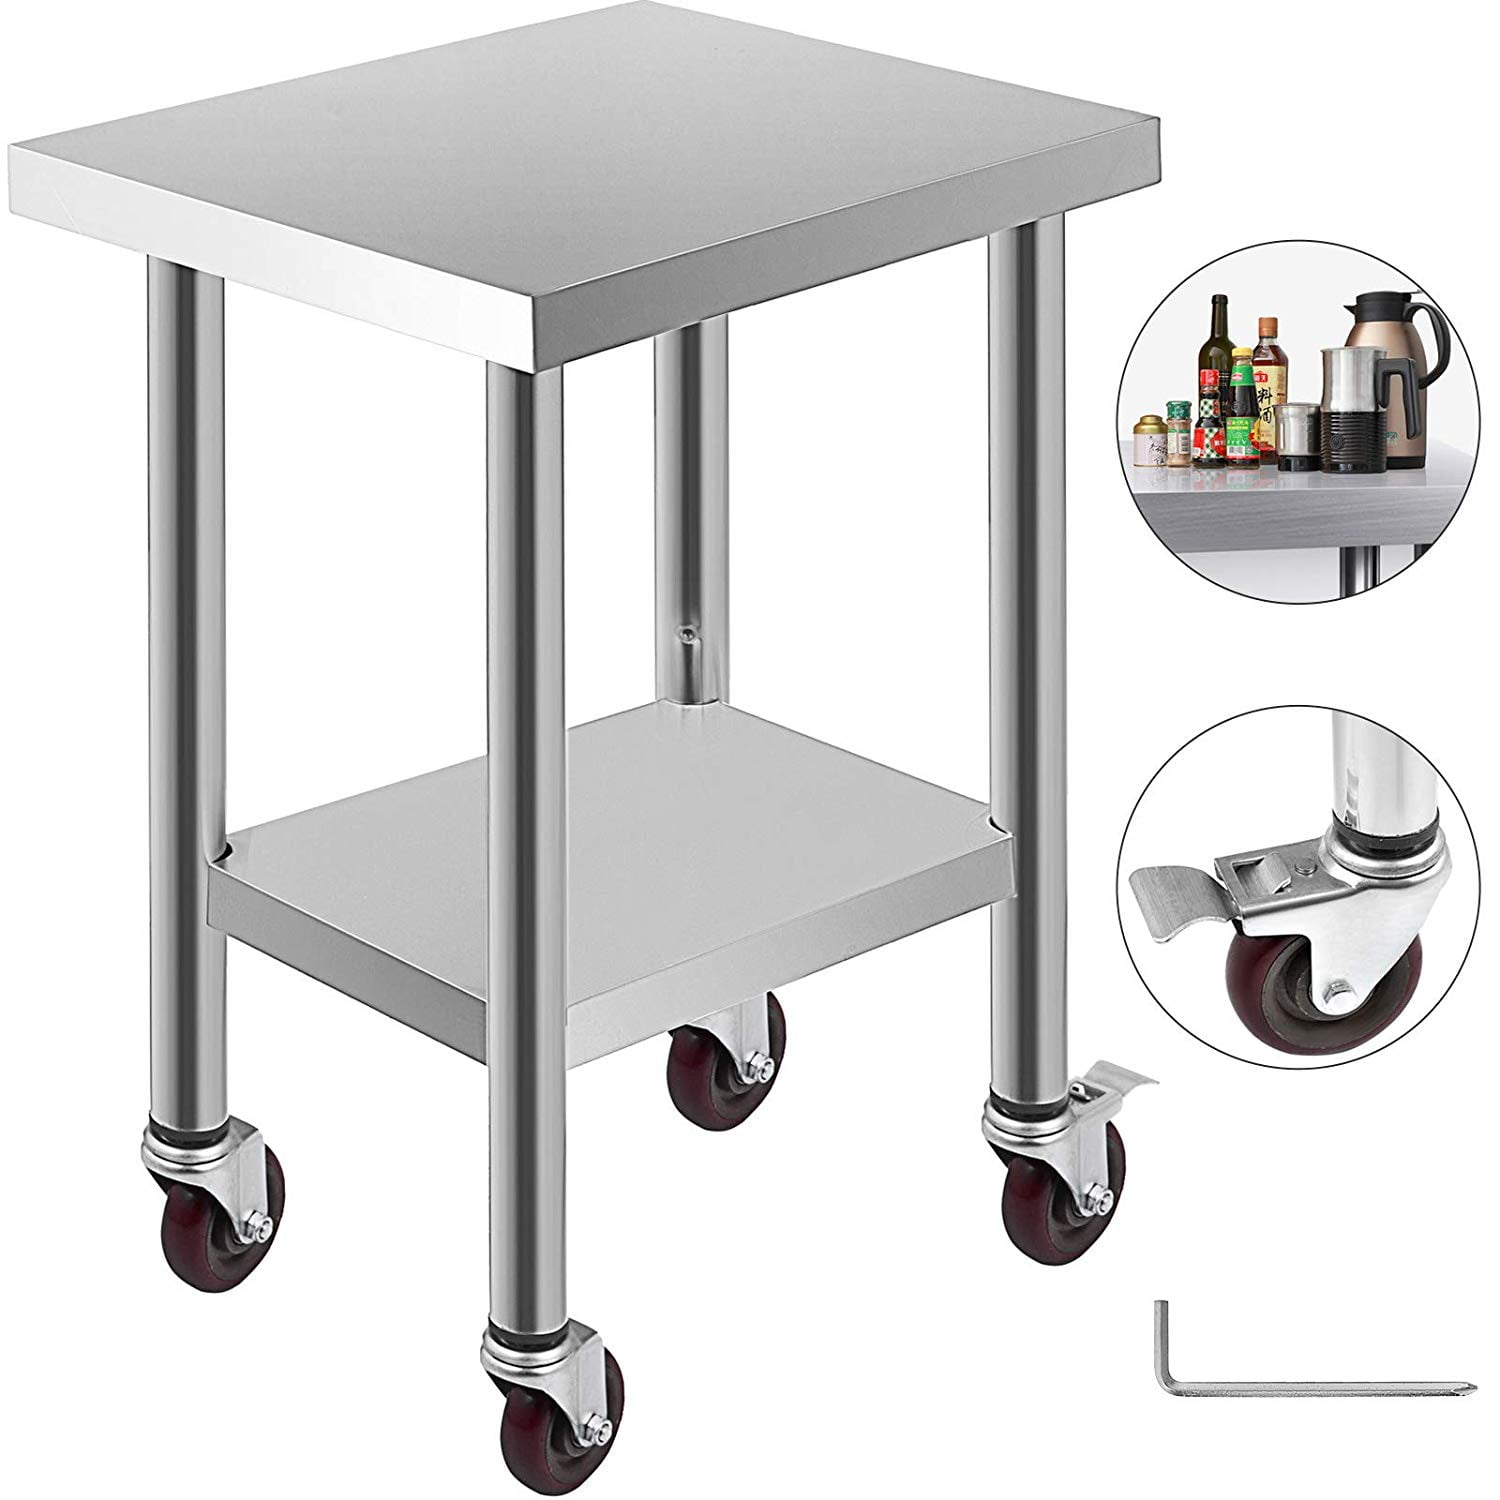 24"x18"Stainless Steel Work Table 3-Stage Adjustable Shelf with 4 Stainless Steel Work Table With Wheels